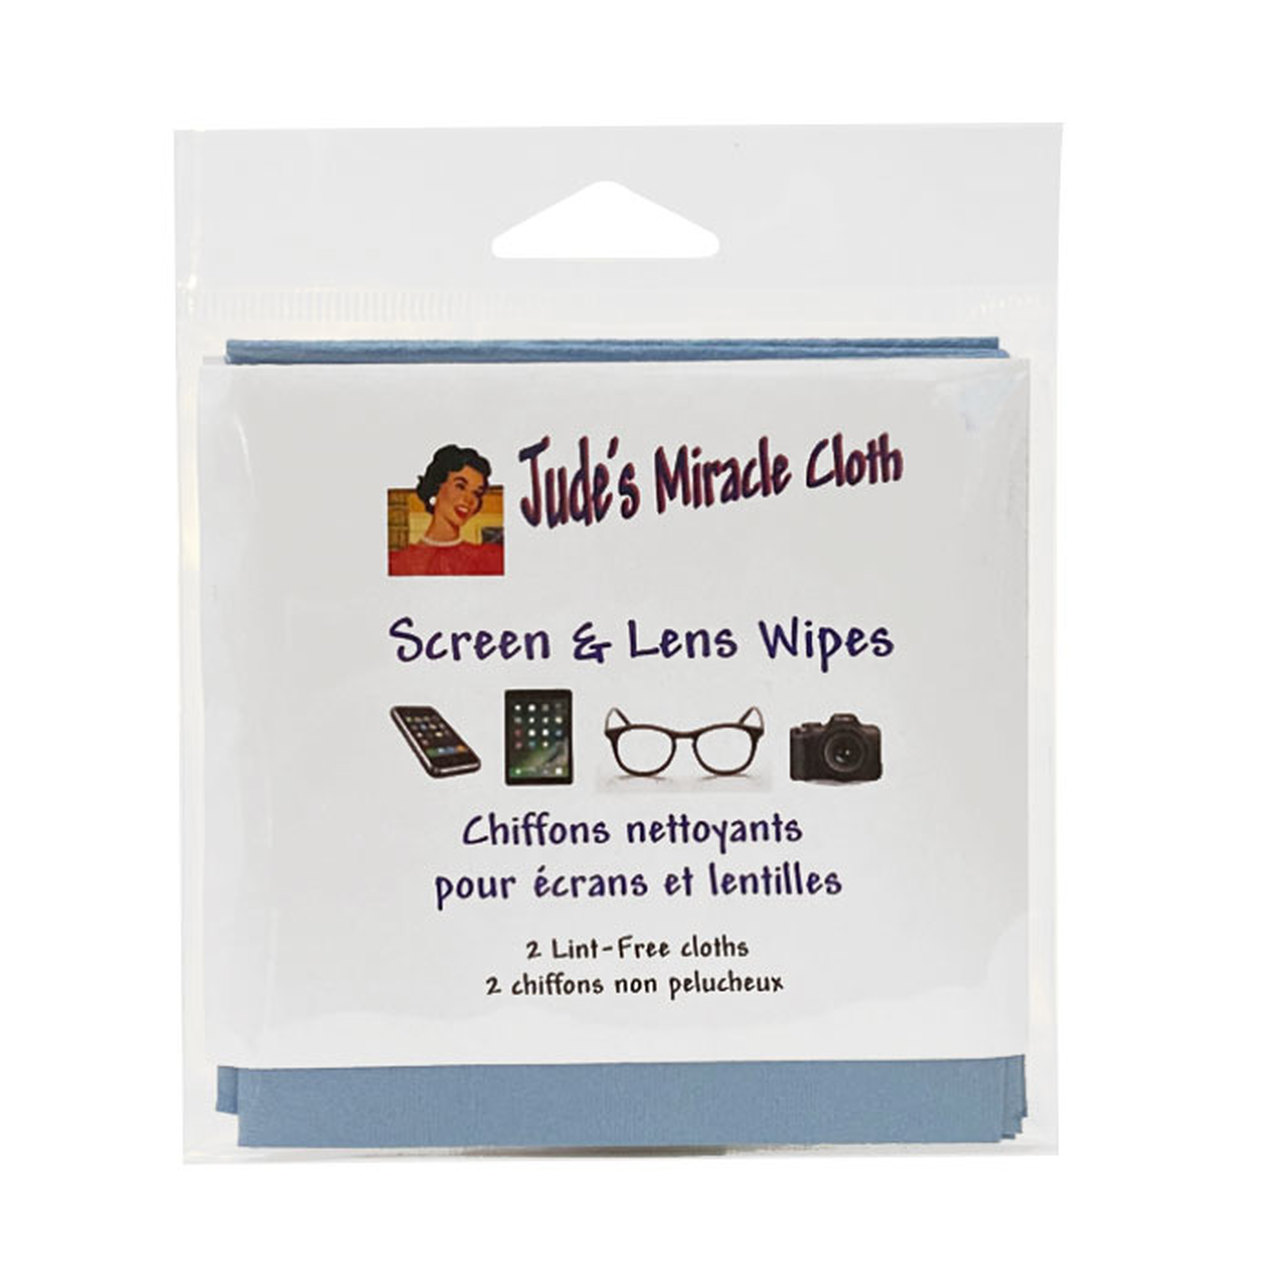 2150 - Jude's Screen and Lens Wipes